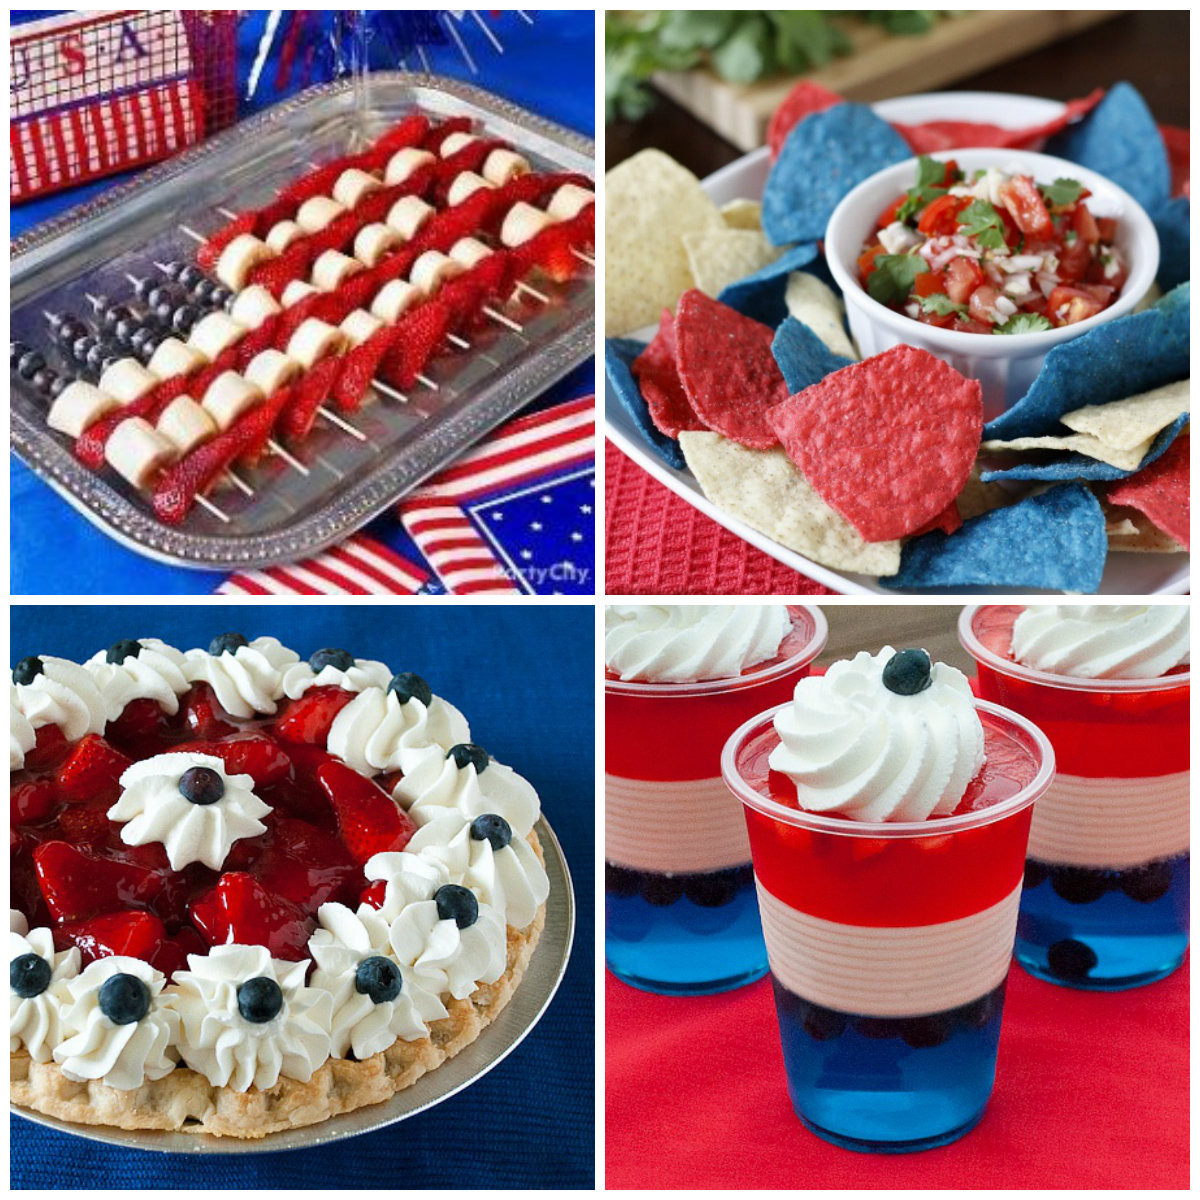 The Best Ideas for Memorial Day Food Ideas Home, Family, Style and